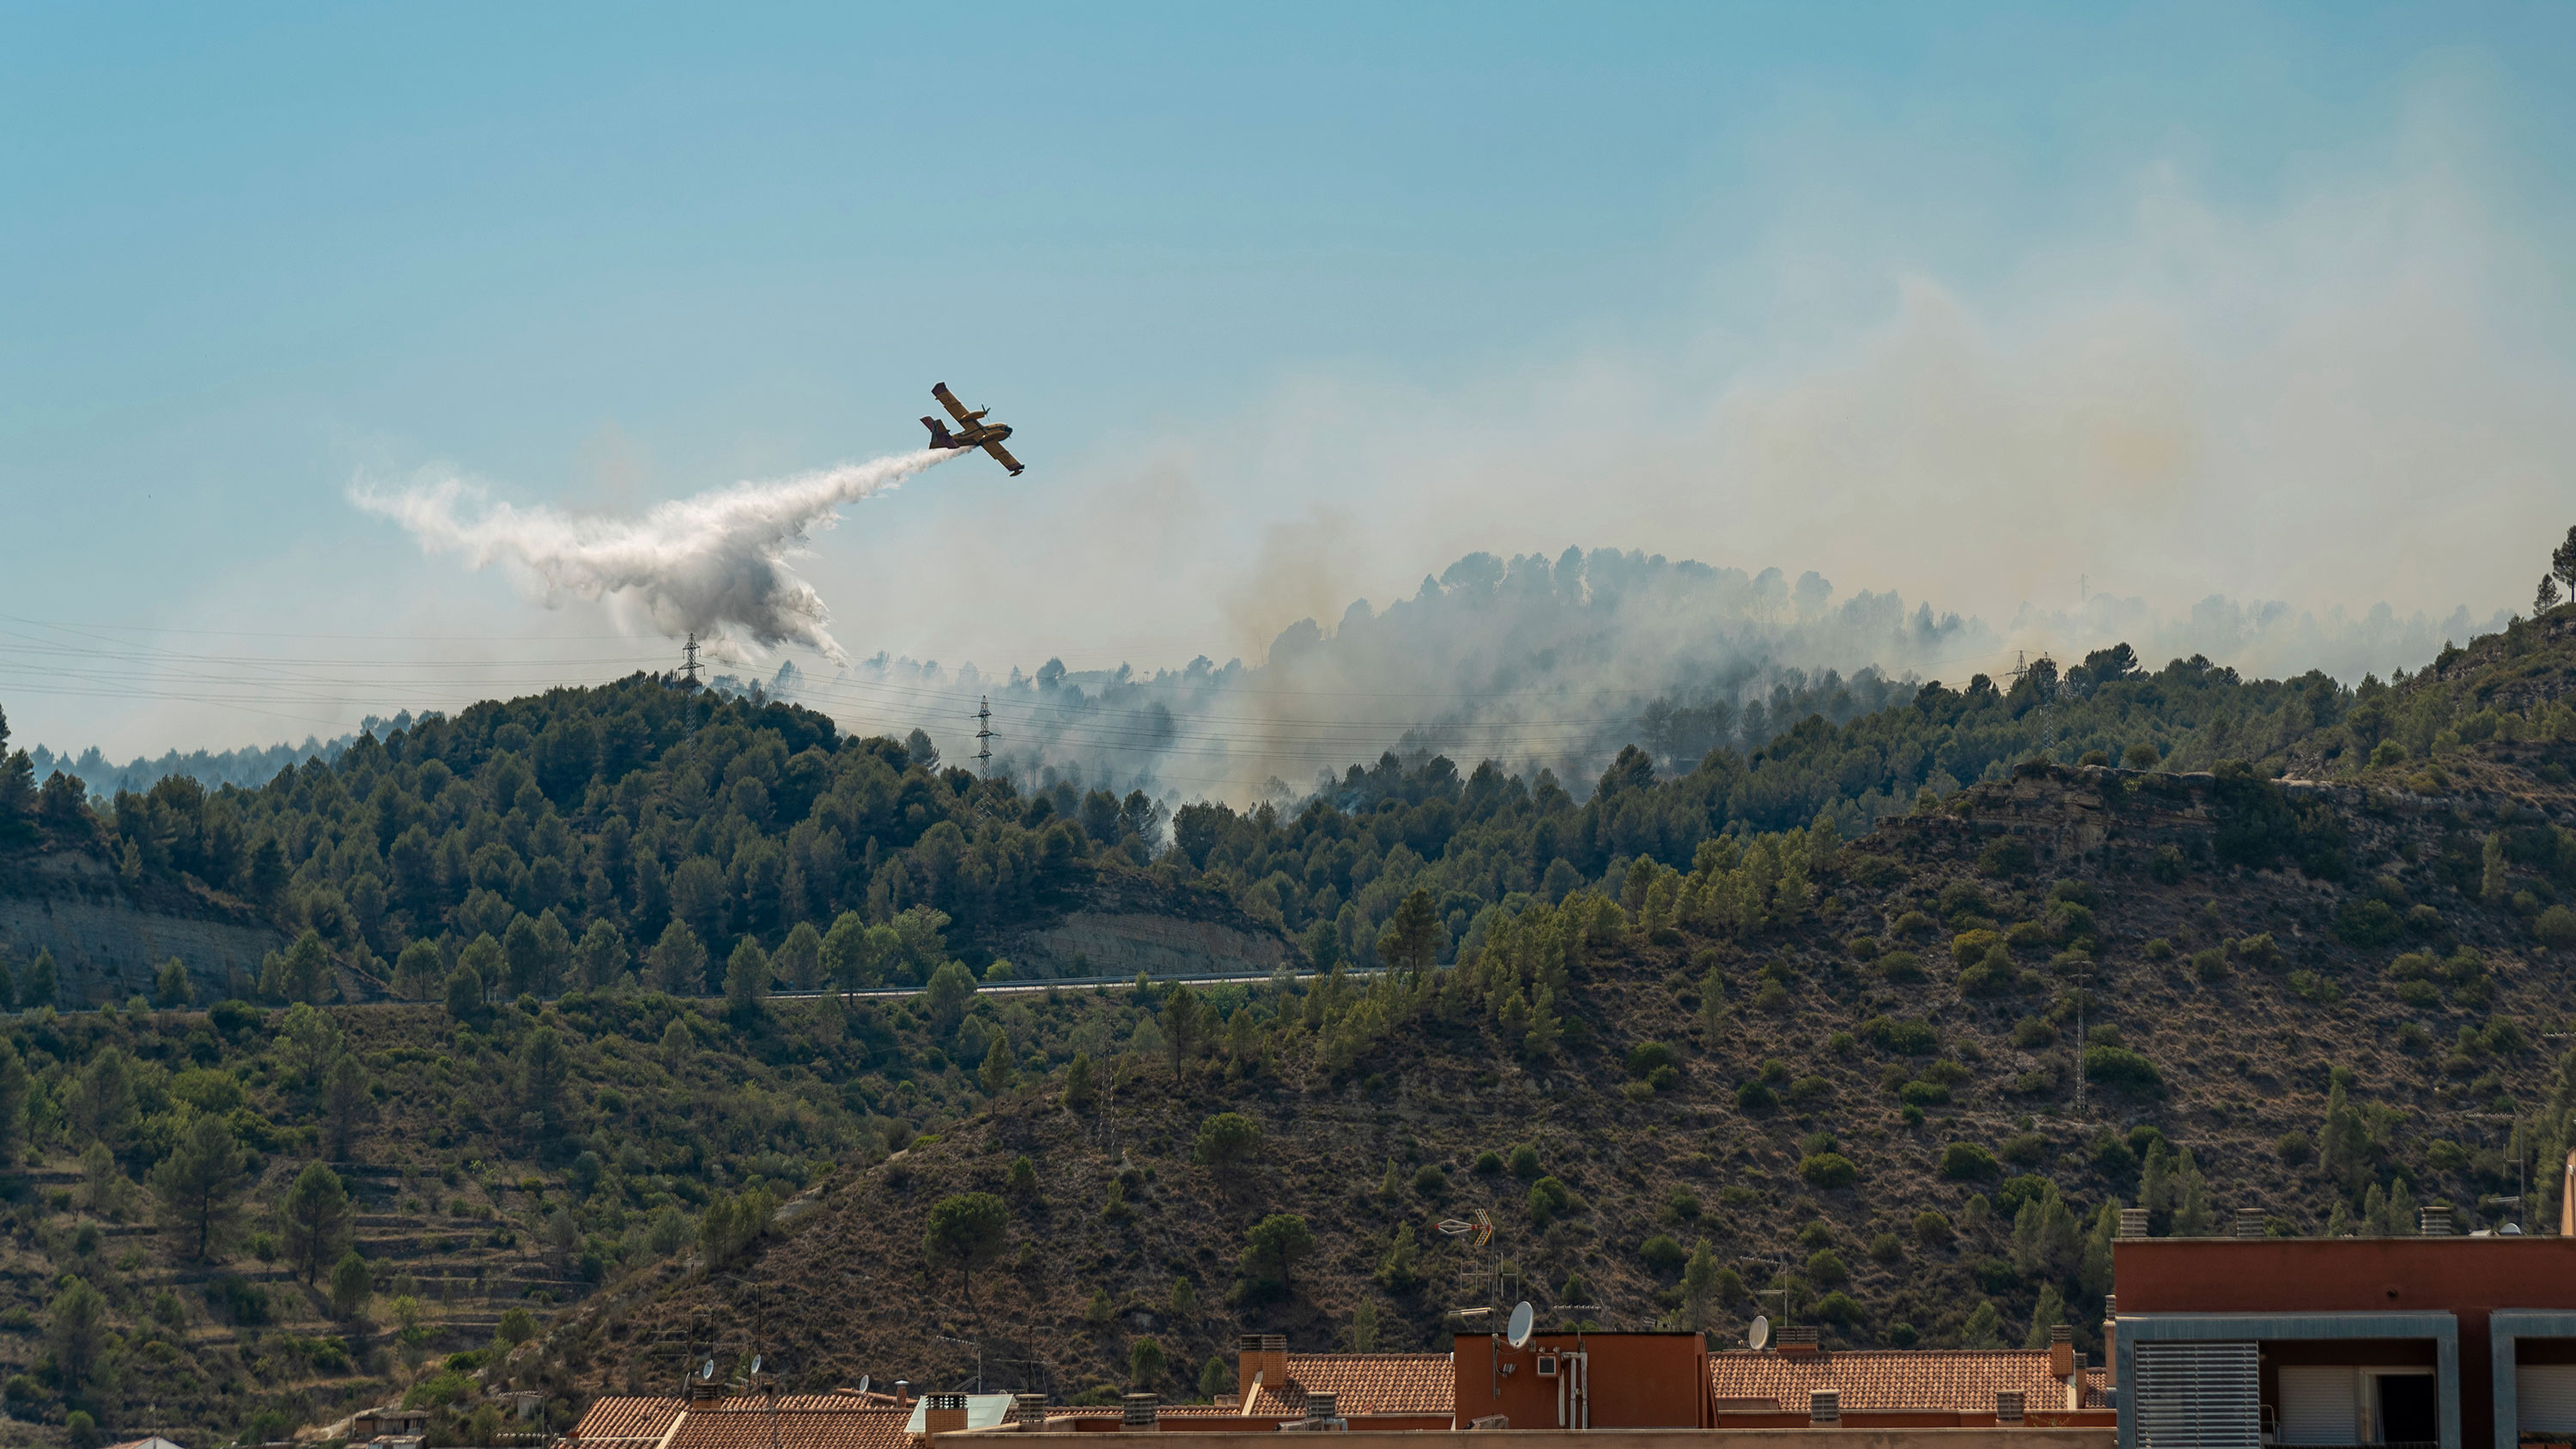 A plane drops water over fires in the Catalonia region countryside in Manresa, Spain, on July 18.